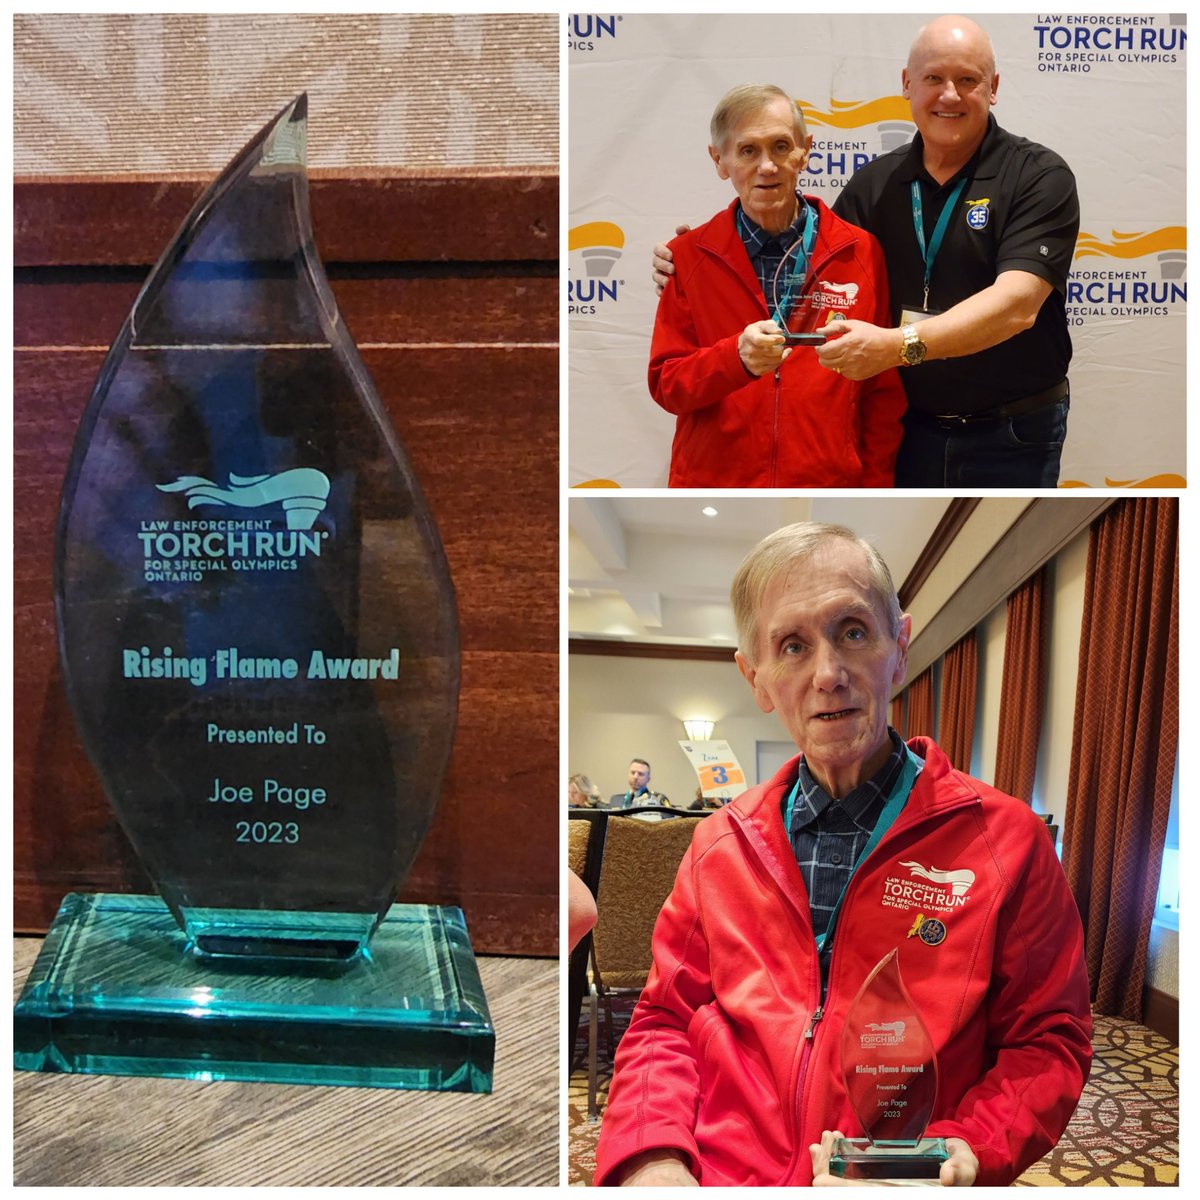 Joe Page won the Rising Flame Award this year at the 2023 Kick Off Conference for Special Olympics! Joe has been a member of the Torch Run team for 15+ years! #RisingFlameAward #SOO #specialolympicsontario #peterboroughpolice #congrats #thankyouforallyoursupport